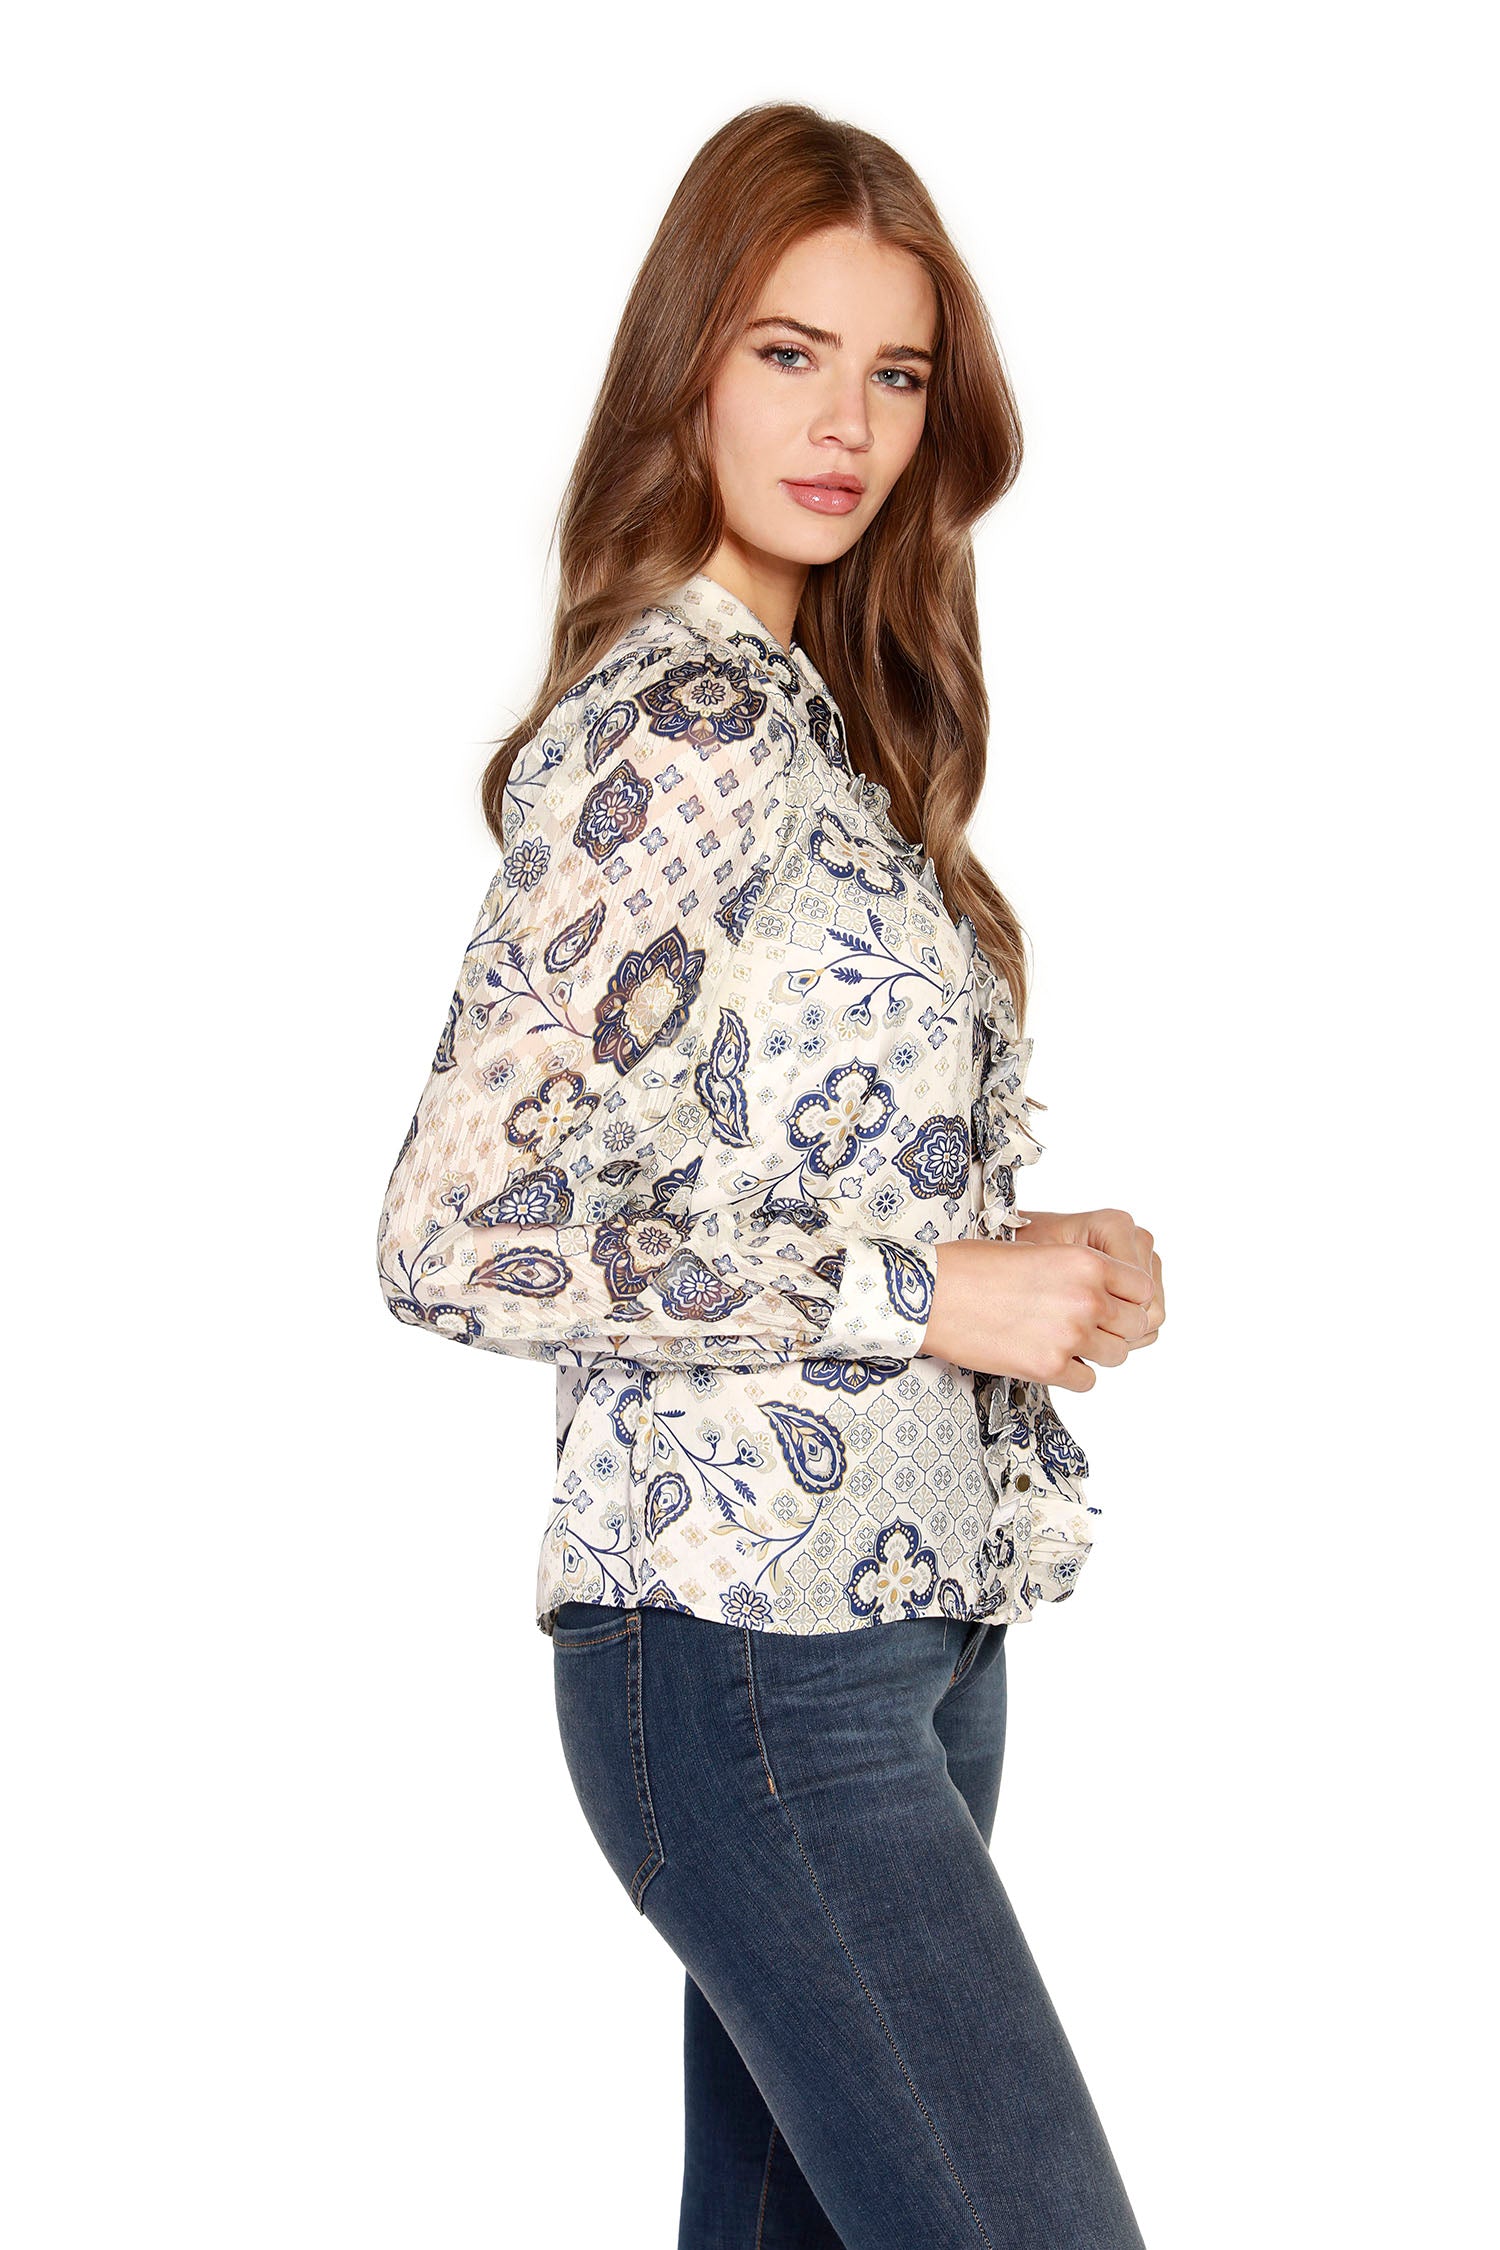 Women's Ruffled Button Front Blouse with Spread Collar | LAST CALL